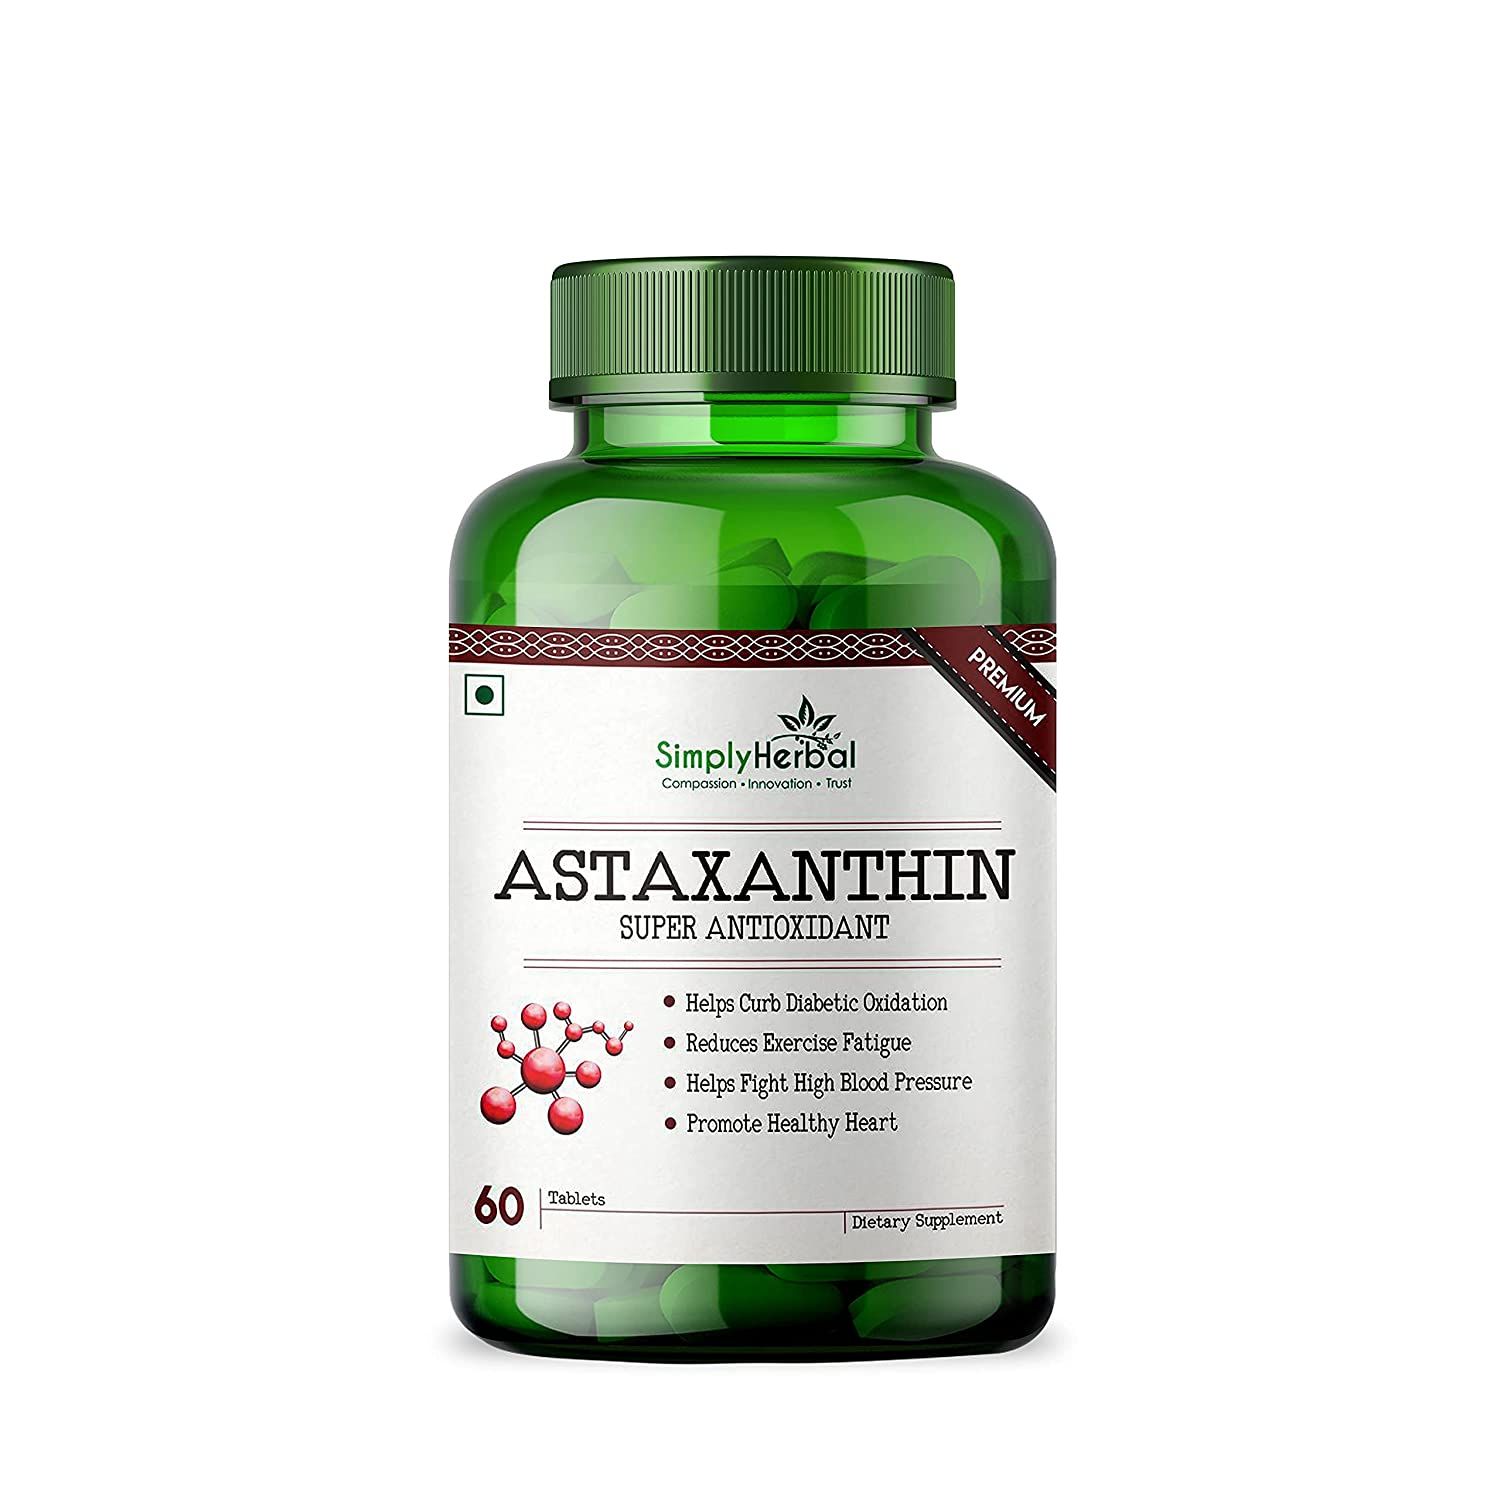 Simply Herbal Astaxanthin Supplement Capsules Image